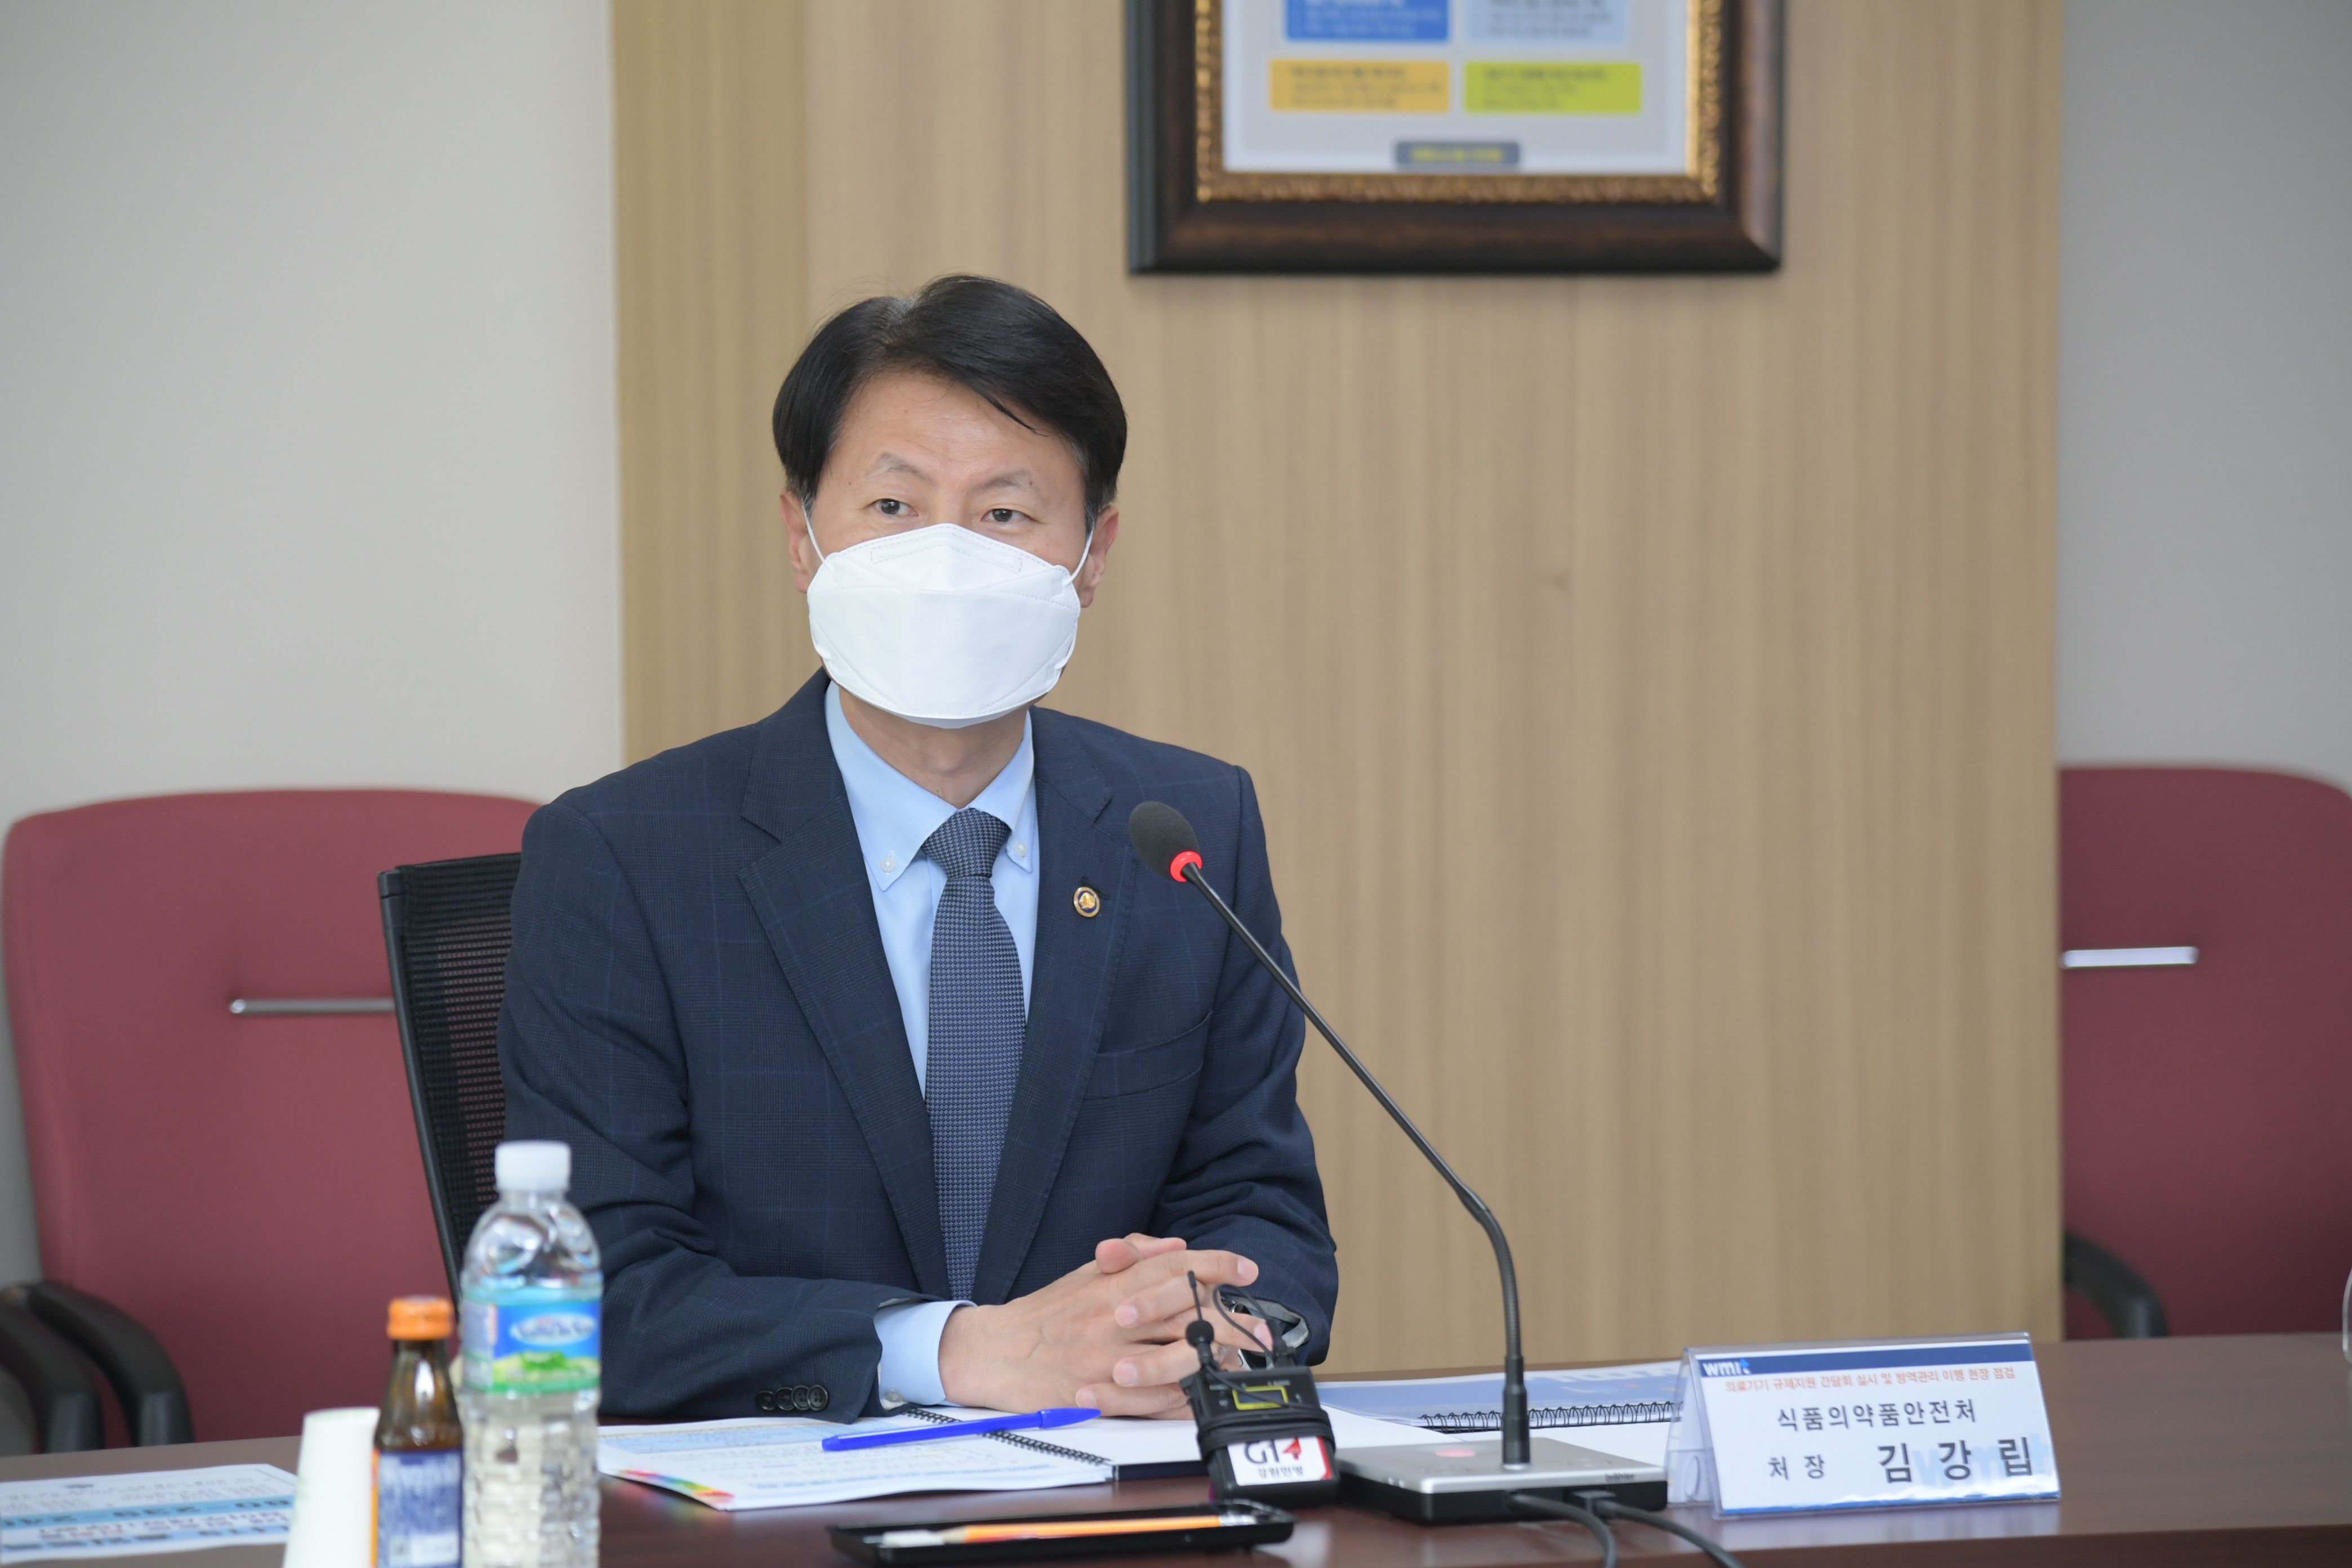 Photo News1 - [May 7, 2021] Minister holds Medical Device Regulatory Support Meeting